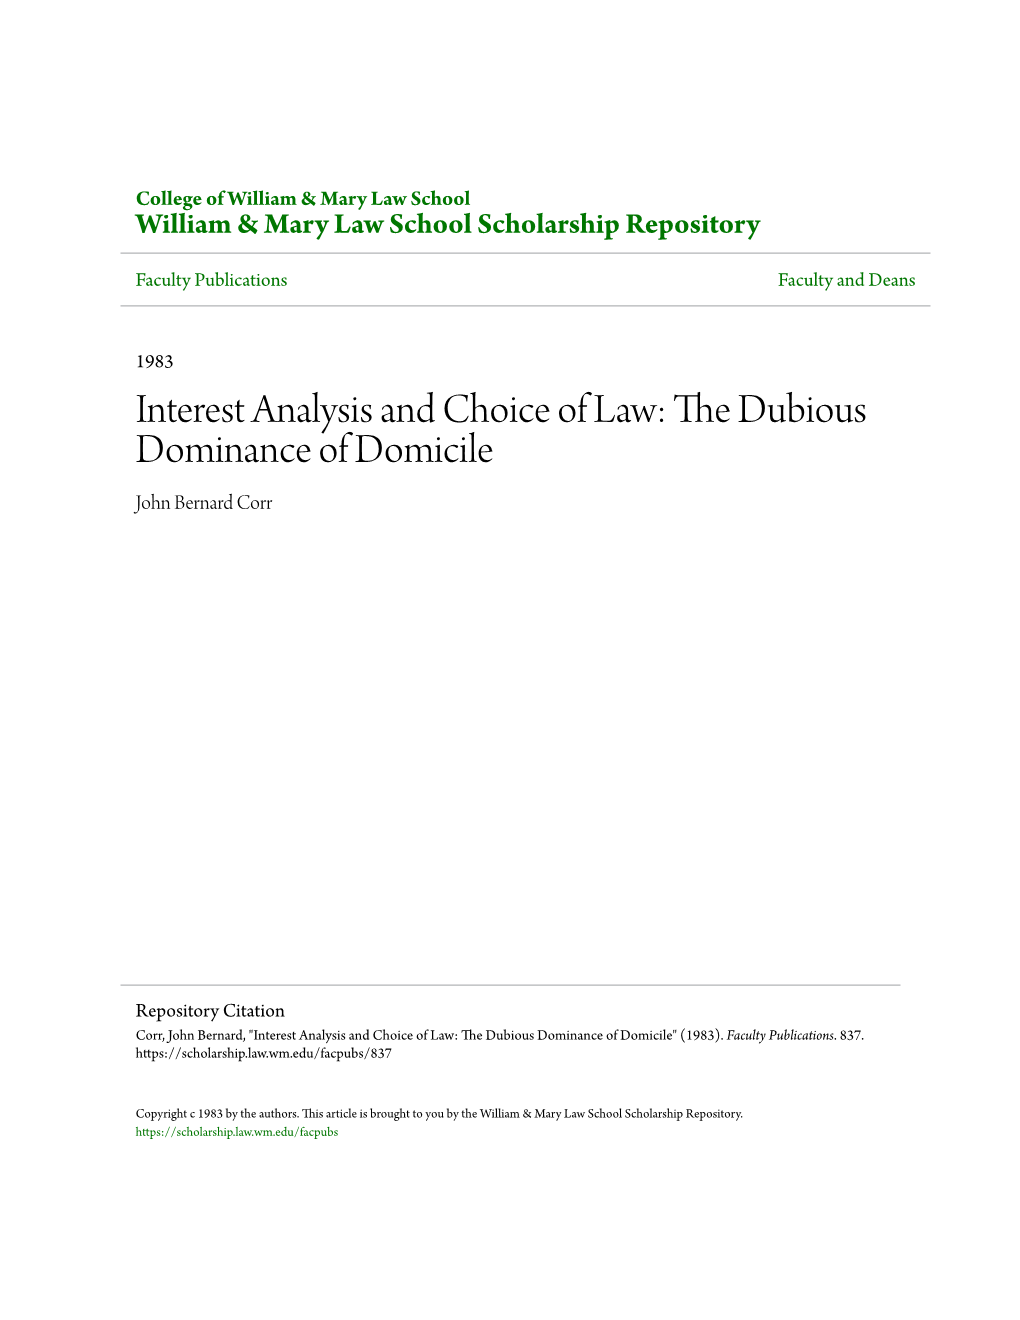 Interest Analysis and Choice of Law: the Dubious Dominance of Domicile John Bernard Corr